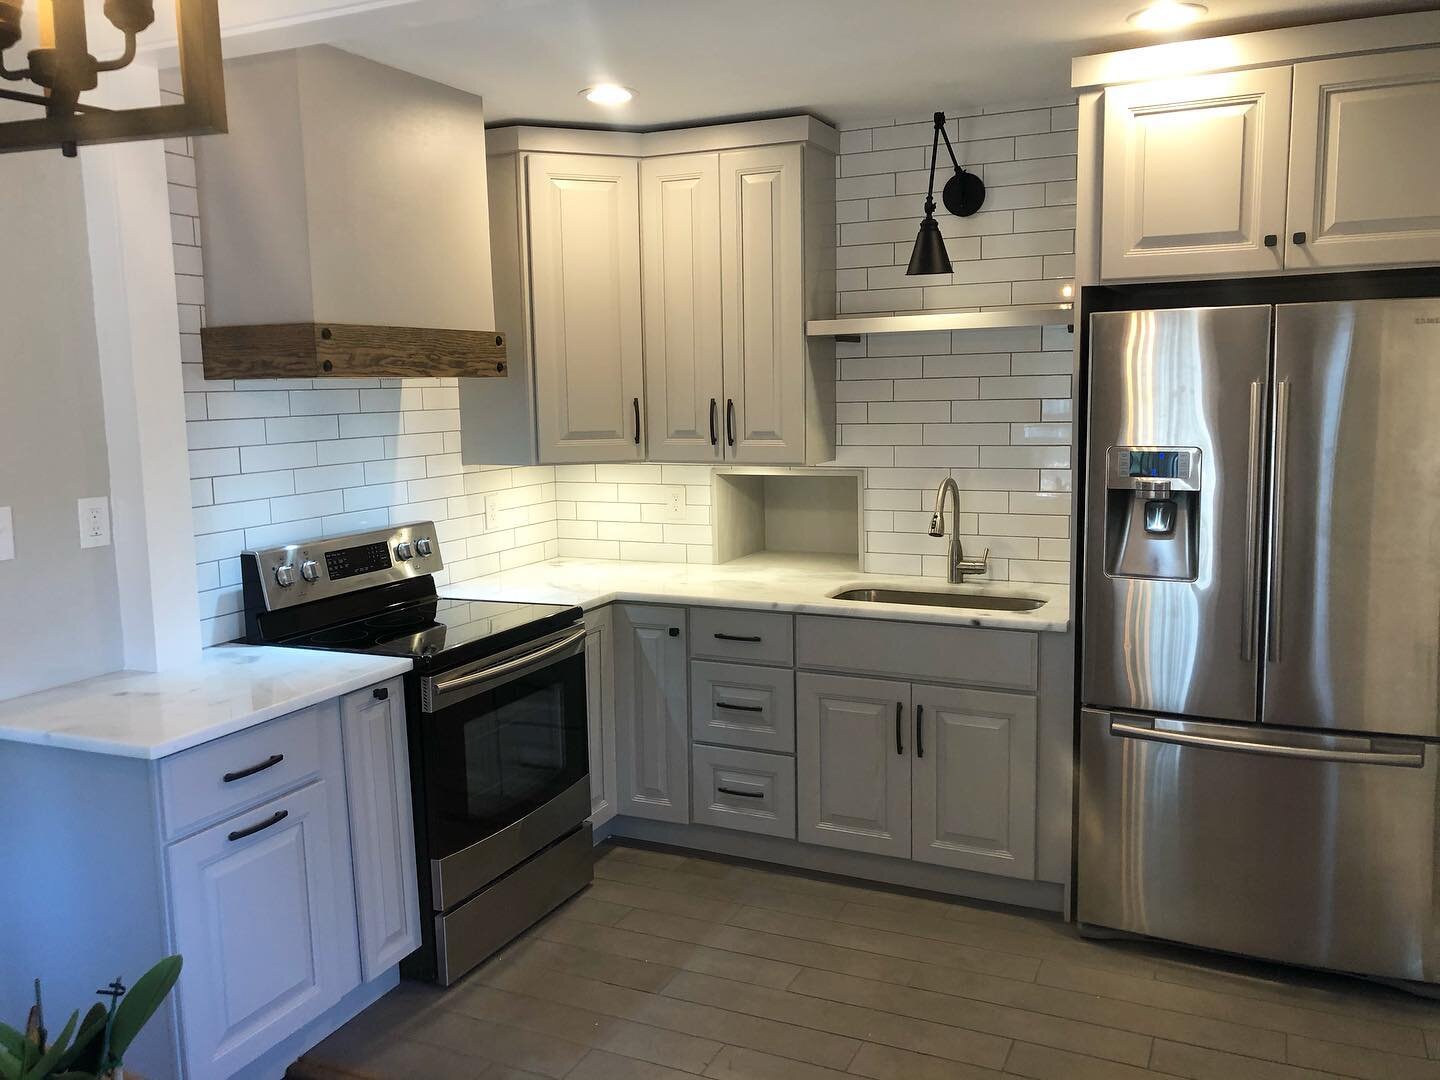 Another St Pete kitchen remodel in the books. Small, cozy, perfect... and this range hood is one of my all time favorites!! Thanks Jessie for trusting me with your space :) #kr2construction #newkitchen #kitchenremodel #graycabinets #stpetersburgflori